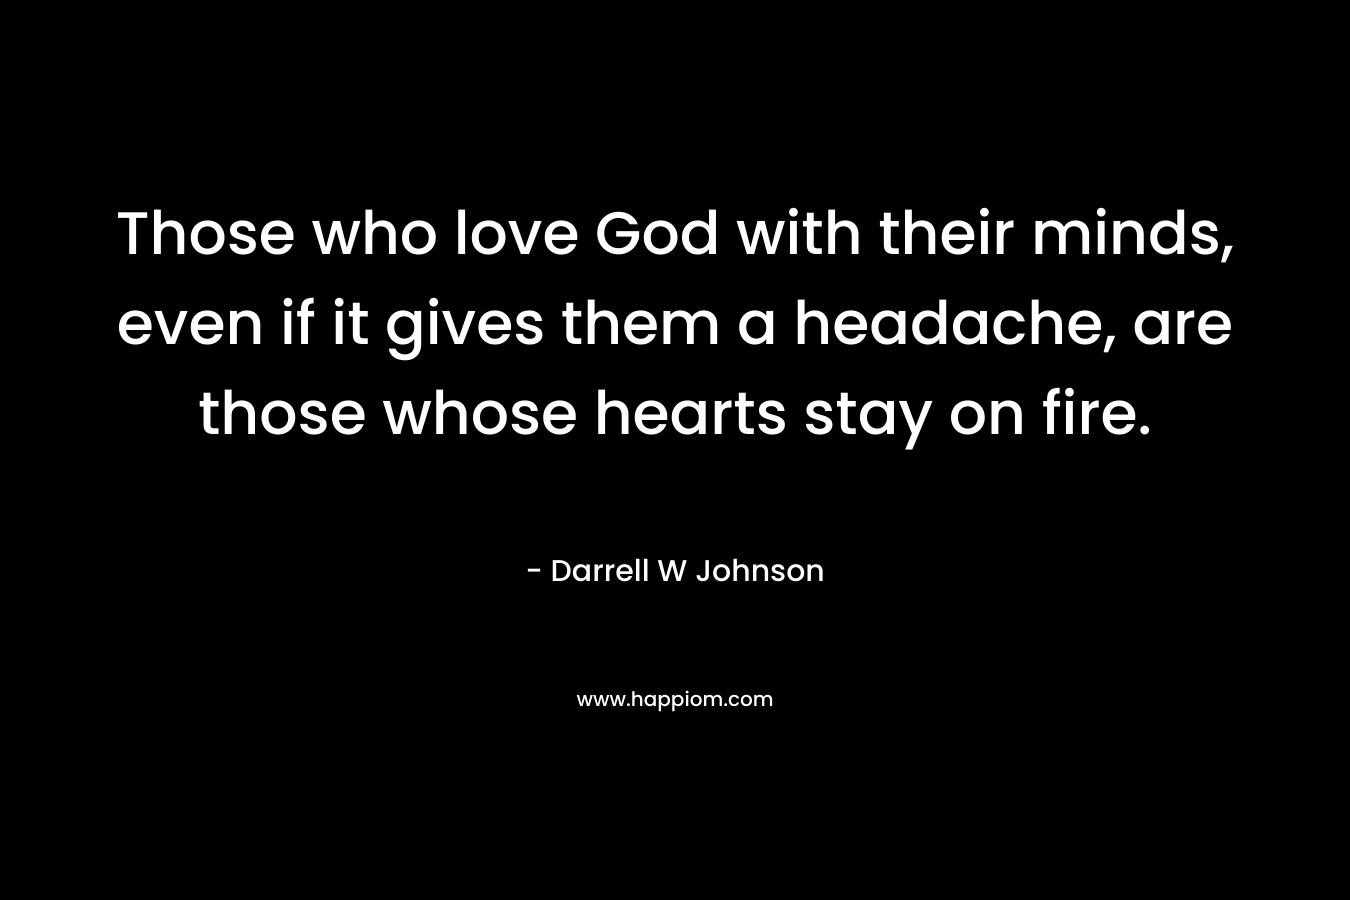 Those who love God with their minds, even if it gives them a headache, are those whose hearts stay on fire. – Darrell W Johnson